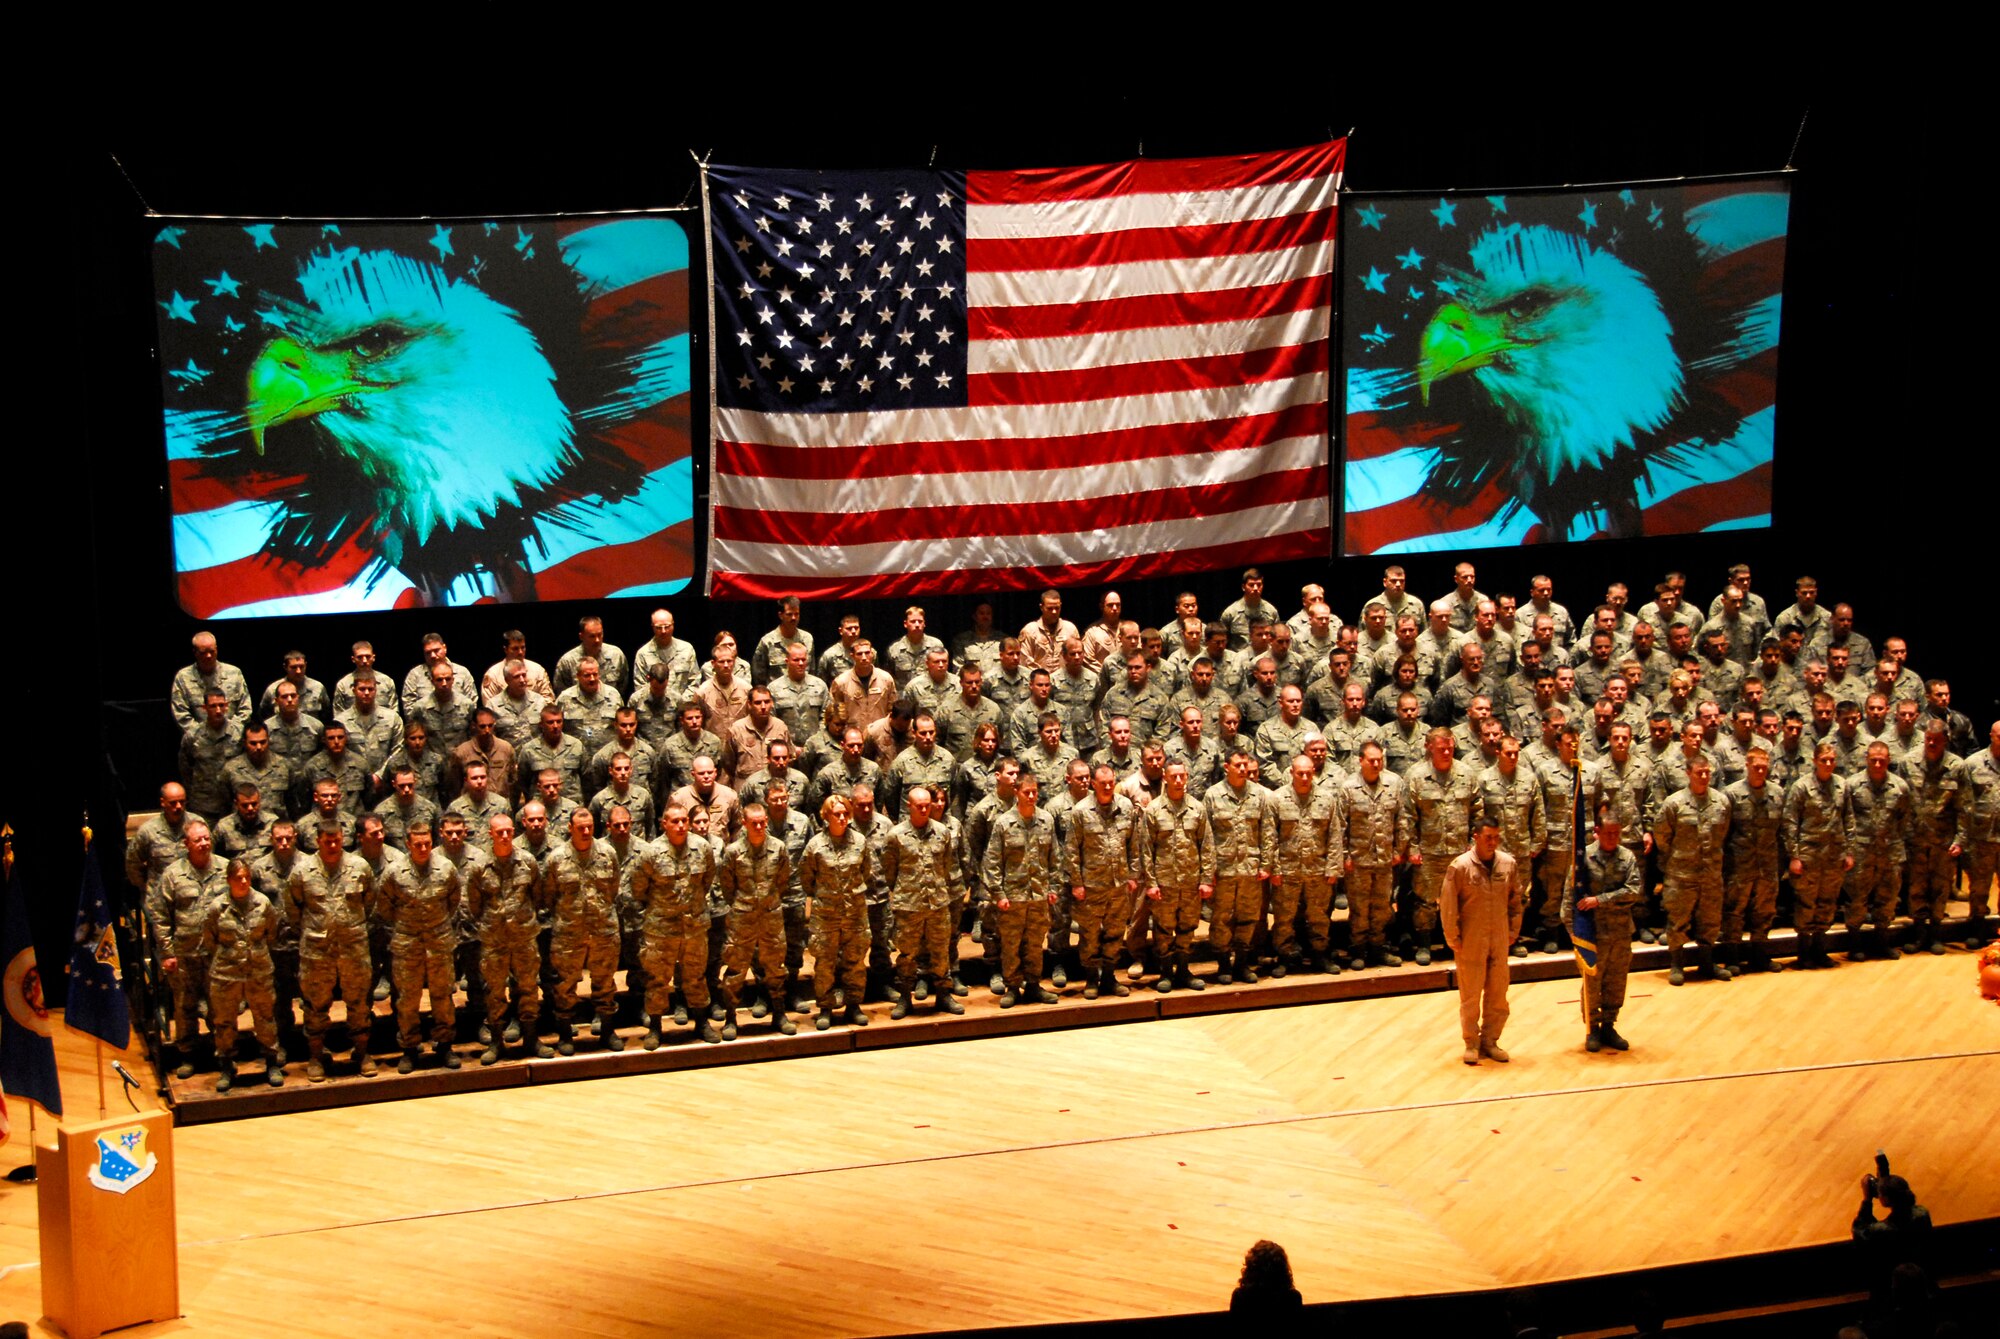 202 members of the 148th Fighter Wing, Duluth, Minn. stand in formation during a deployment ceremony in Duluth, Minn. Nov. 2, 2008.  Approximately 300 148th Fighter Wing members will deploy overseas in support of Operation Iraqi Freedom and/or Operation Enduring Freedom between Sept 2008 and Jan 2009. (U.S. Air Force photo by SSgt Donald L. Acton) (Released)